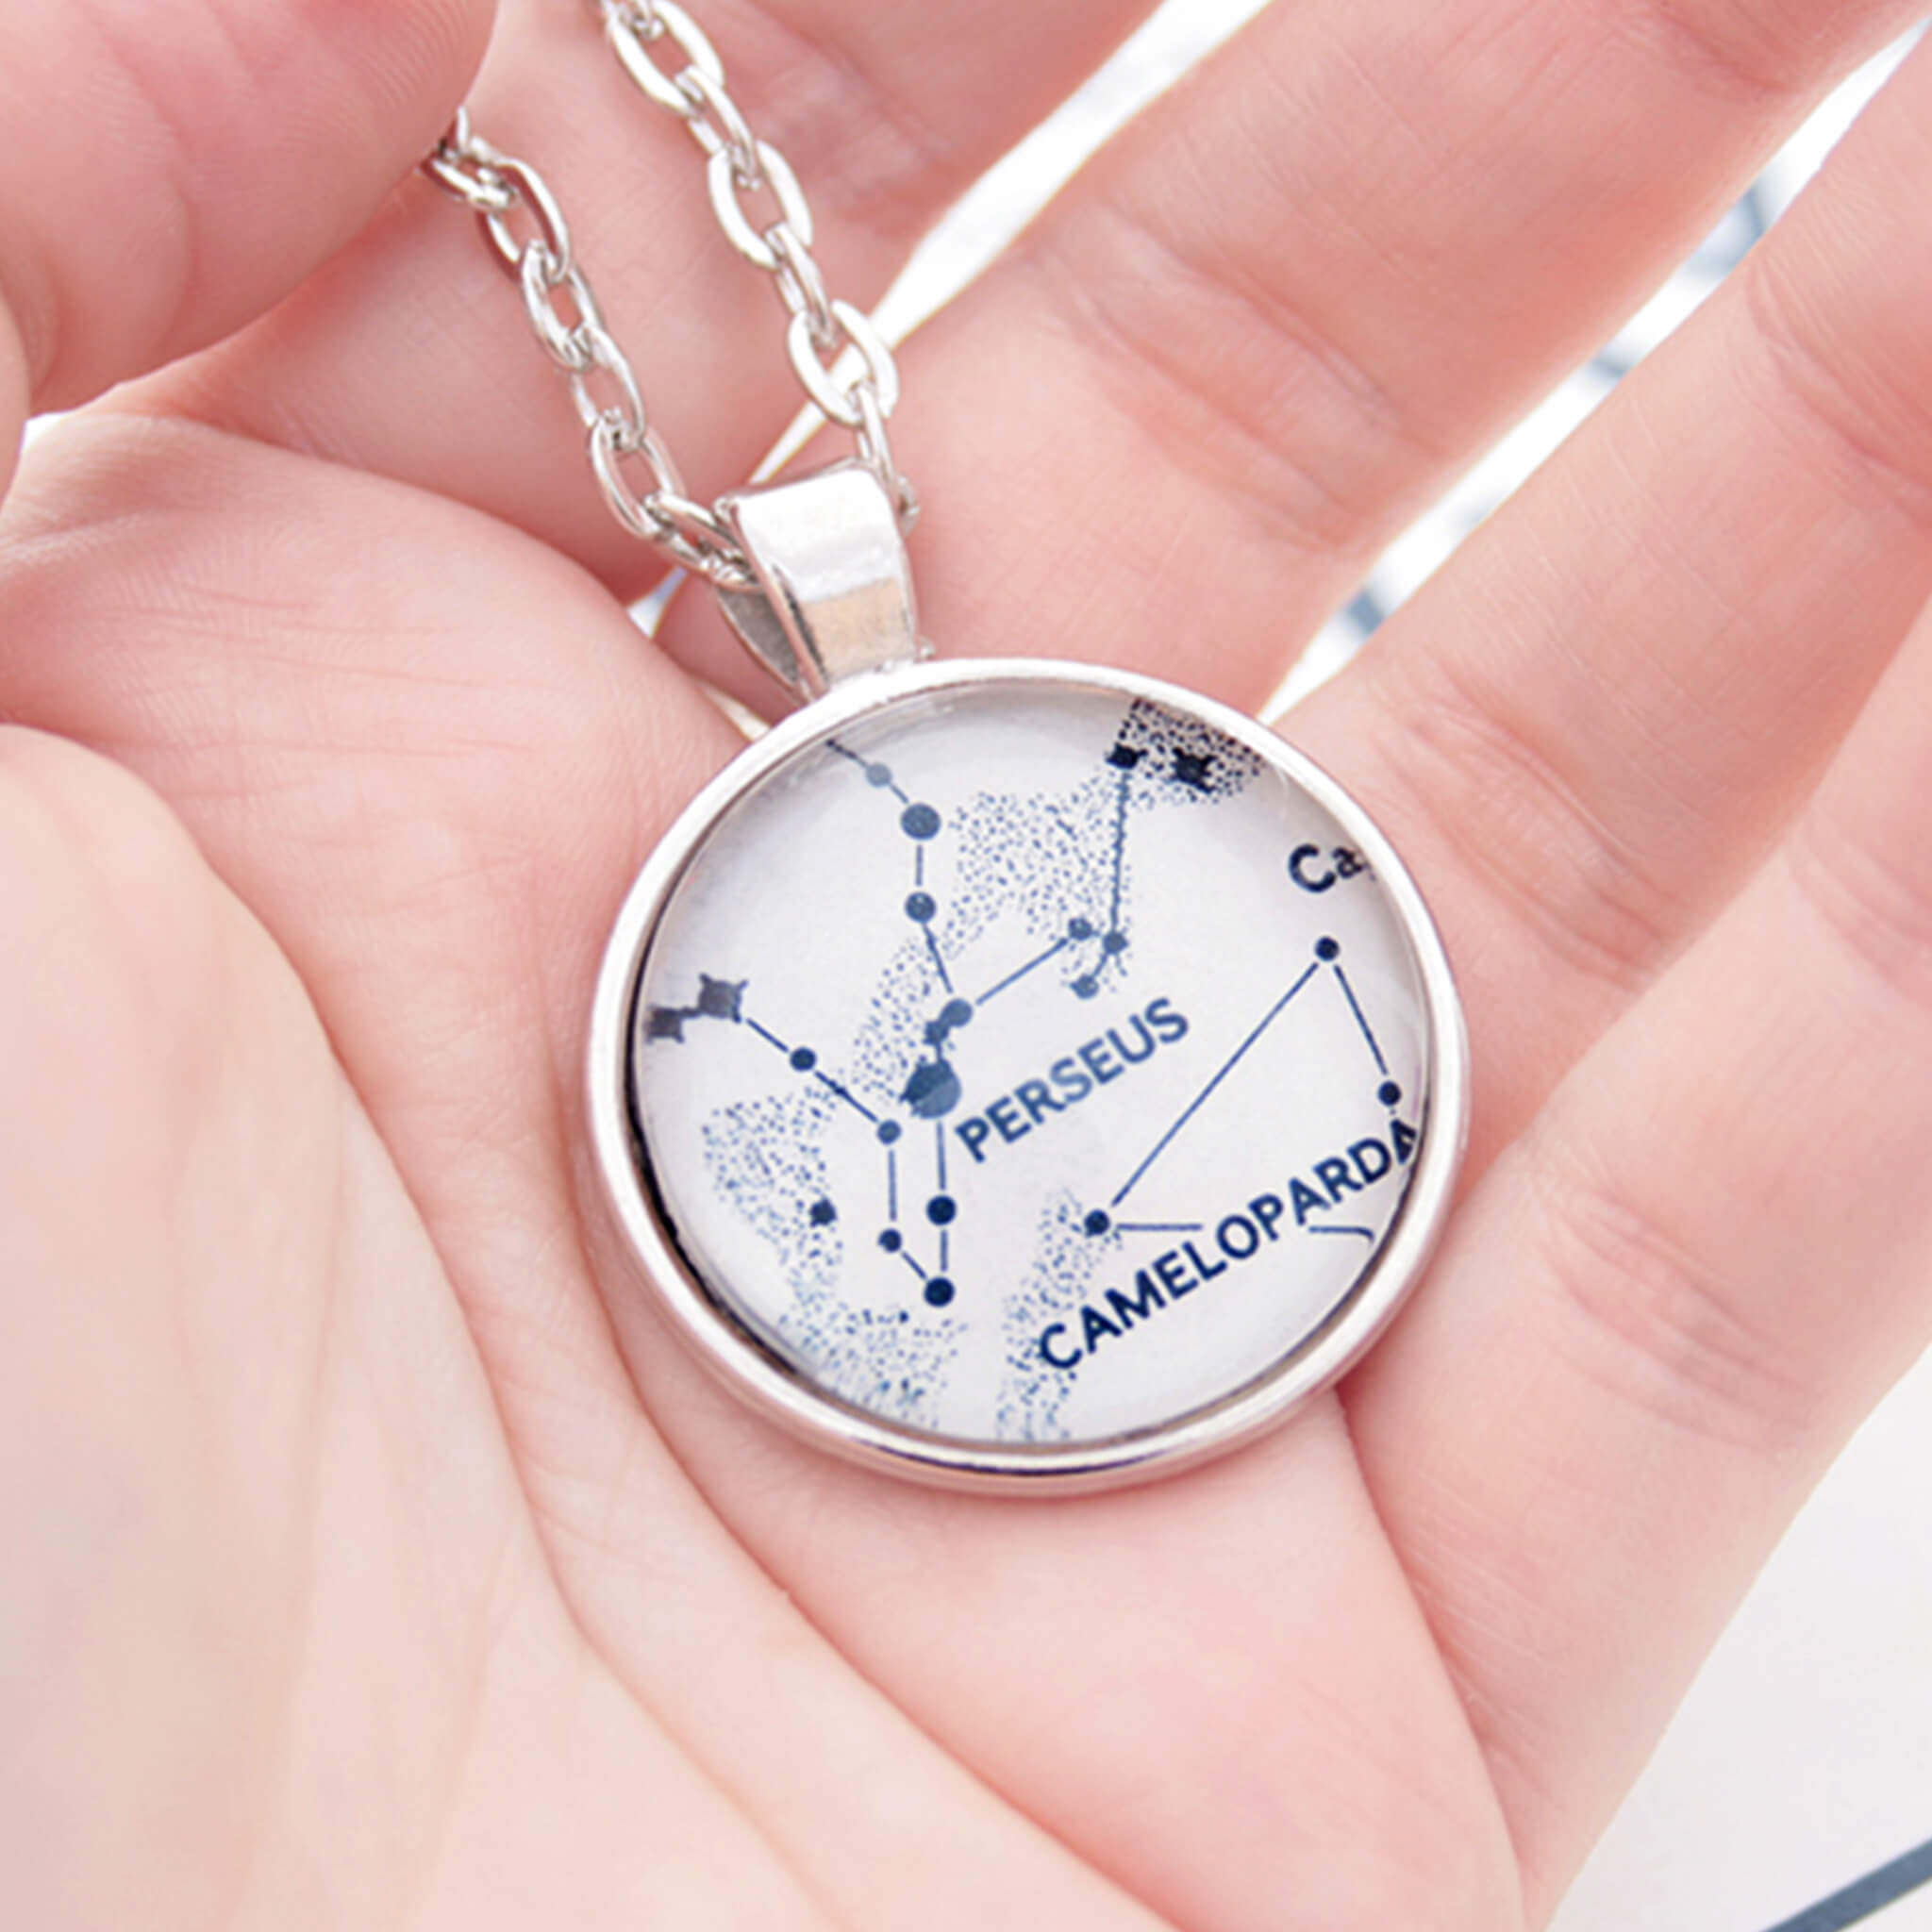 Hand holding silver tone pendant necklace featuring map of Perseus constellations